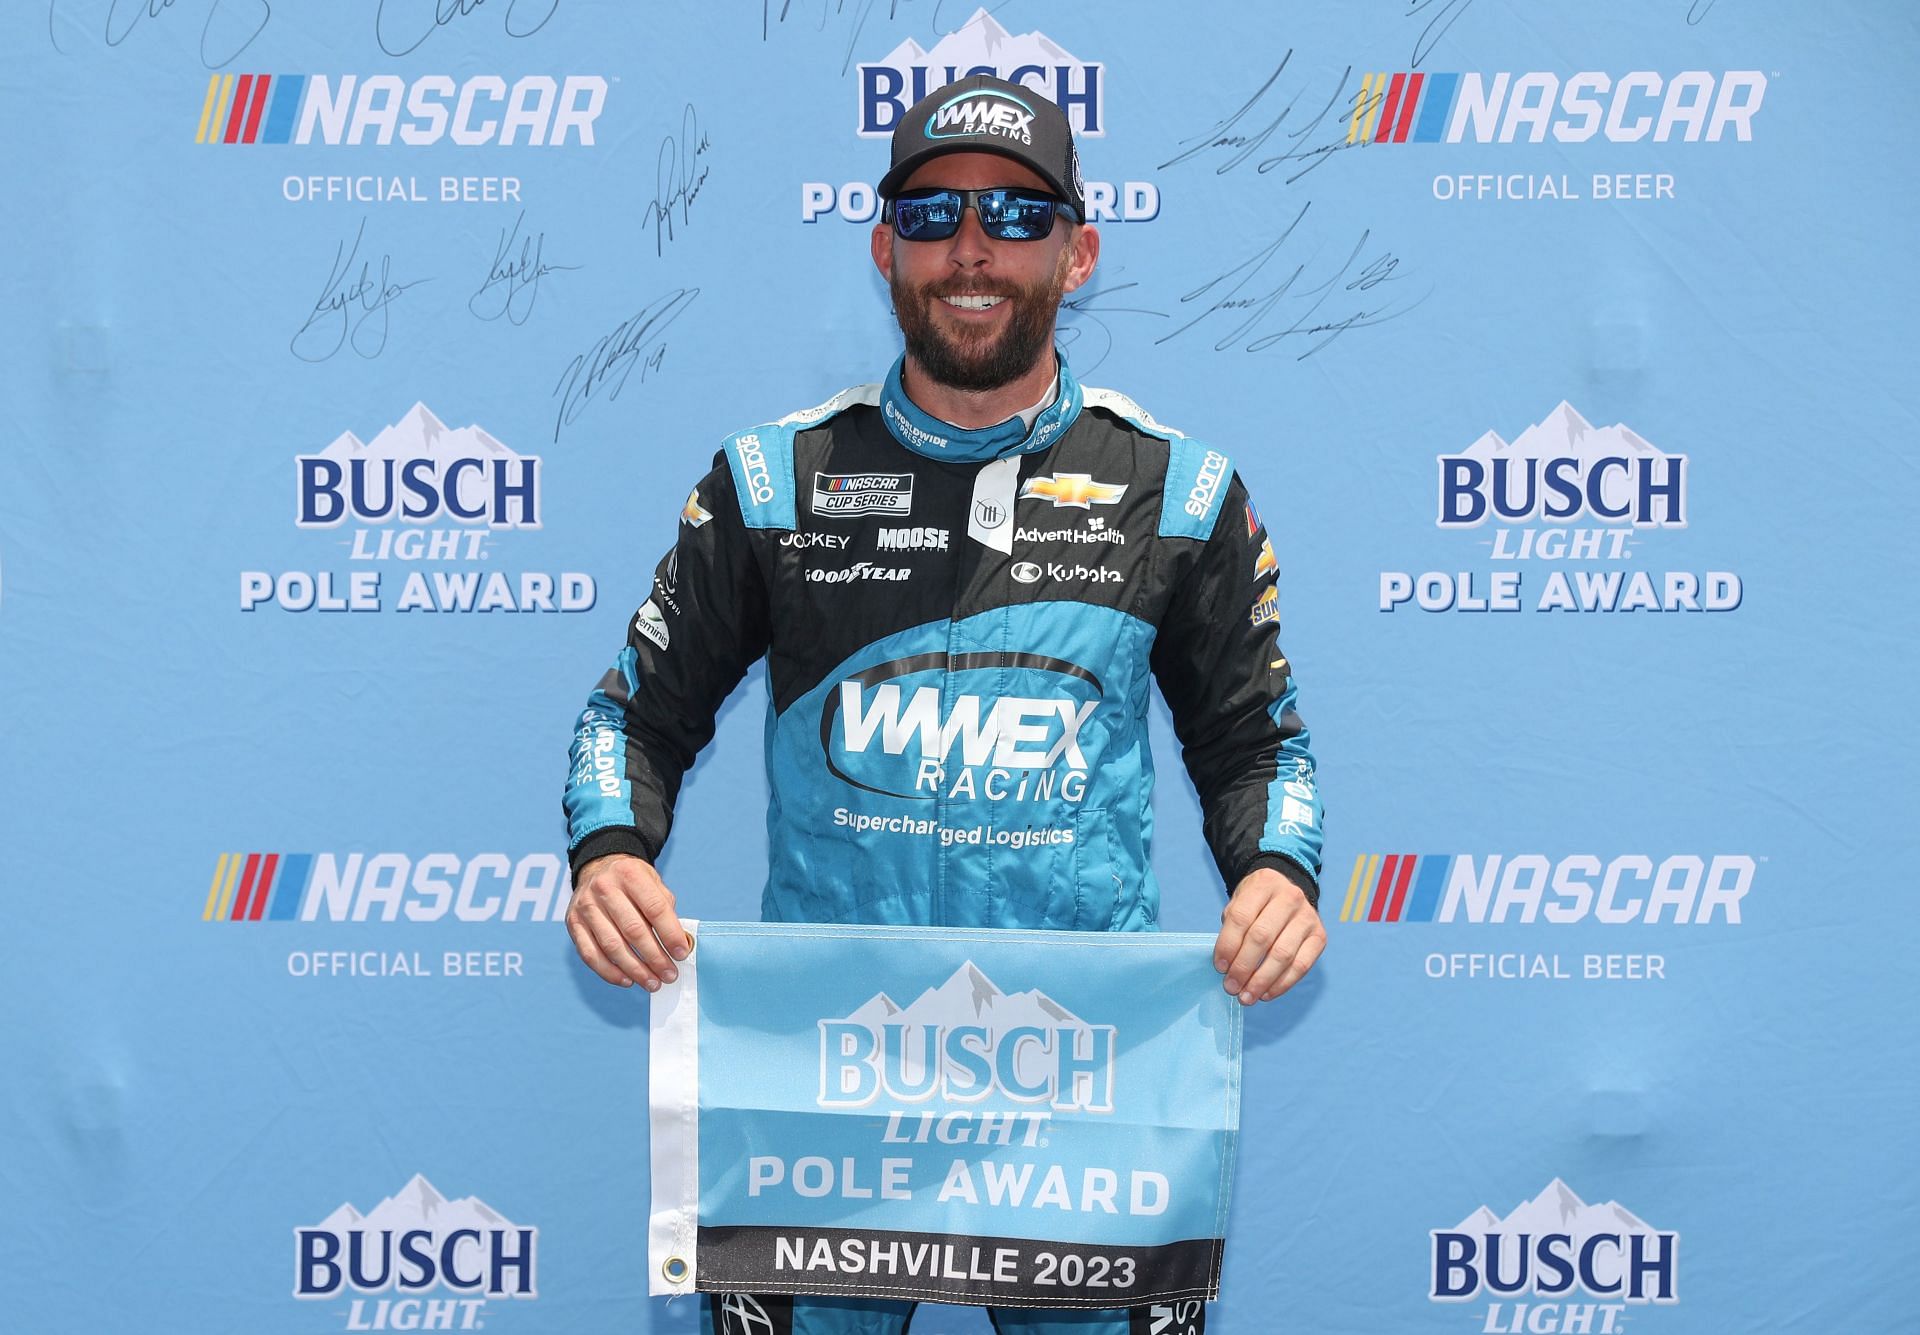 NASCAR 2023 Starting lineup for Ally 400 at Nashville Superspeedway, Ross Chastain takes pole